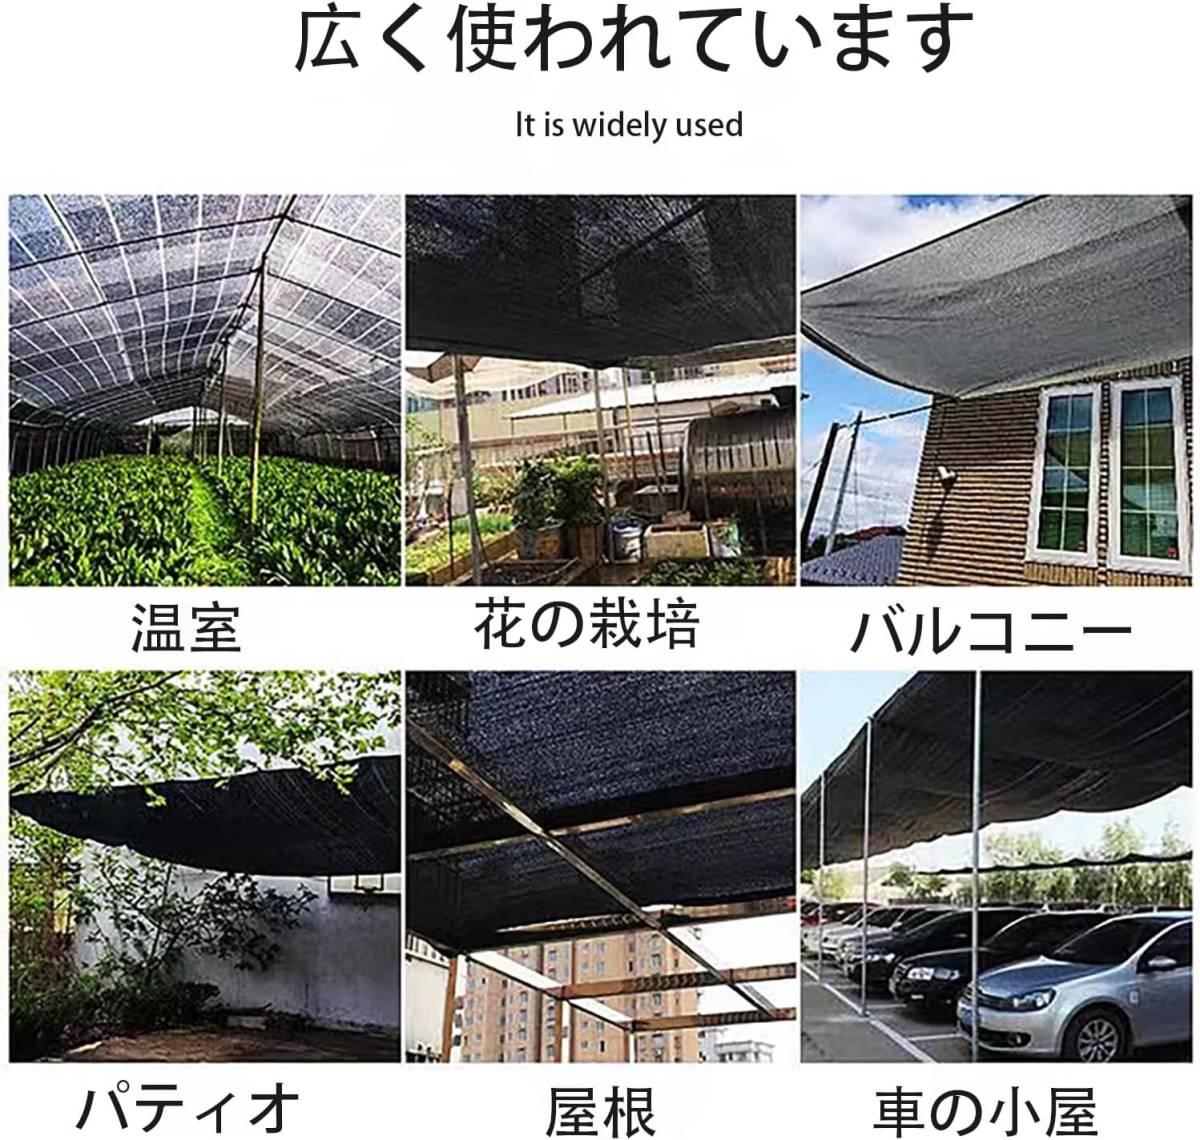 JIANLEI sunshade shade shade net sunshade cease net agriculture for plant gardening for high density. thickness. poly- echi Len (4M*15M, black )